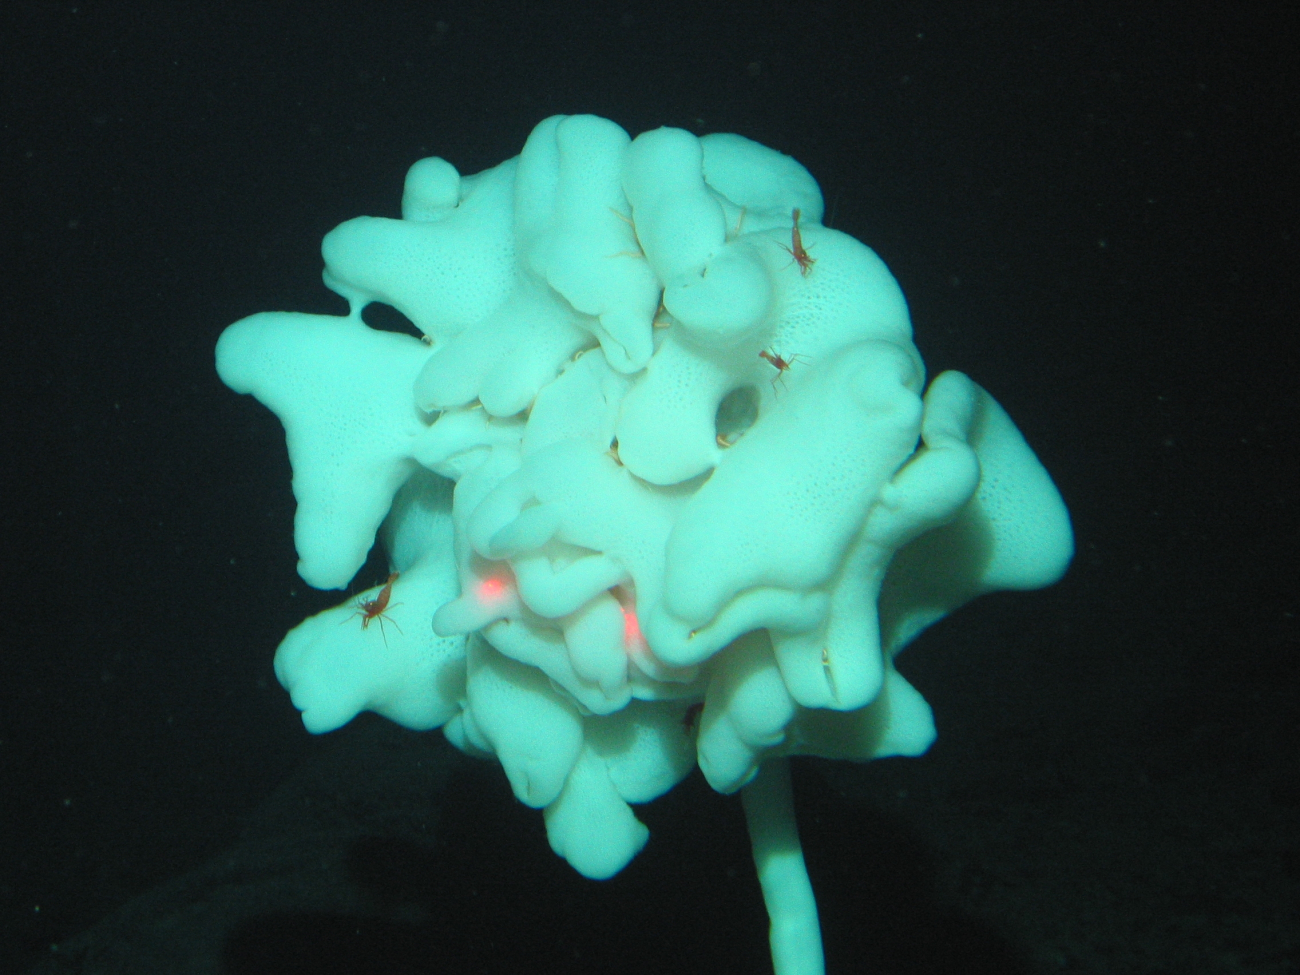 A beautiful white stalked glass sponge with small red shrimp and the arms ofnumerous brittle stars visible